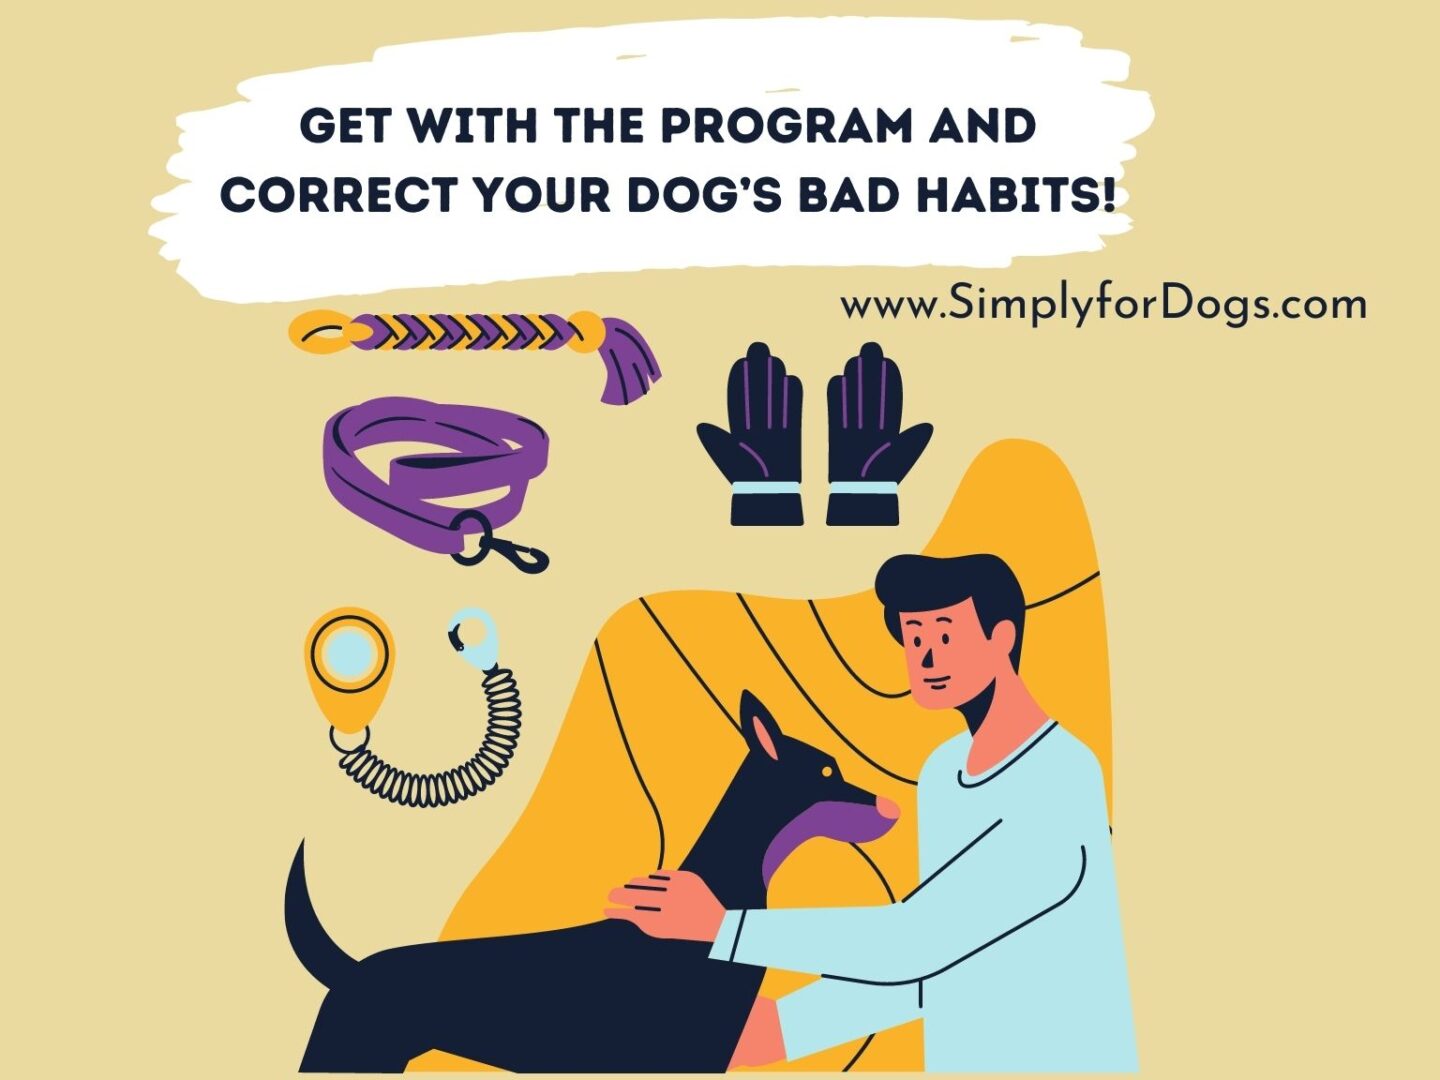 Get with the Program and Correct Your Dog’s Bad Habits!